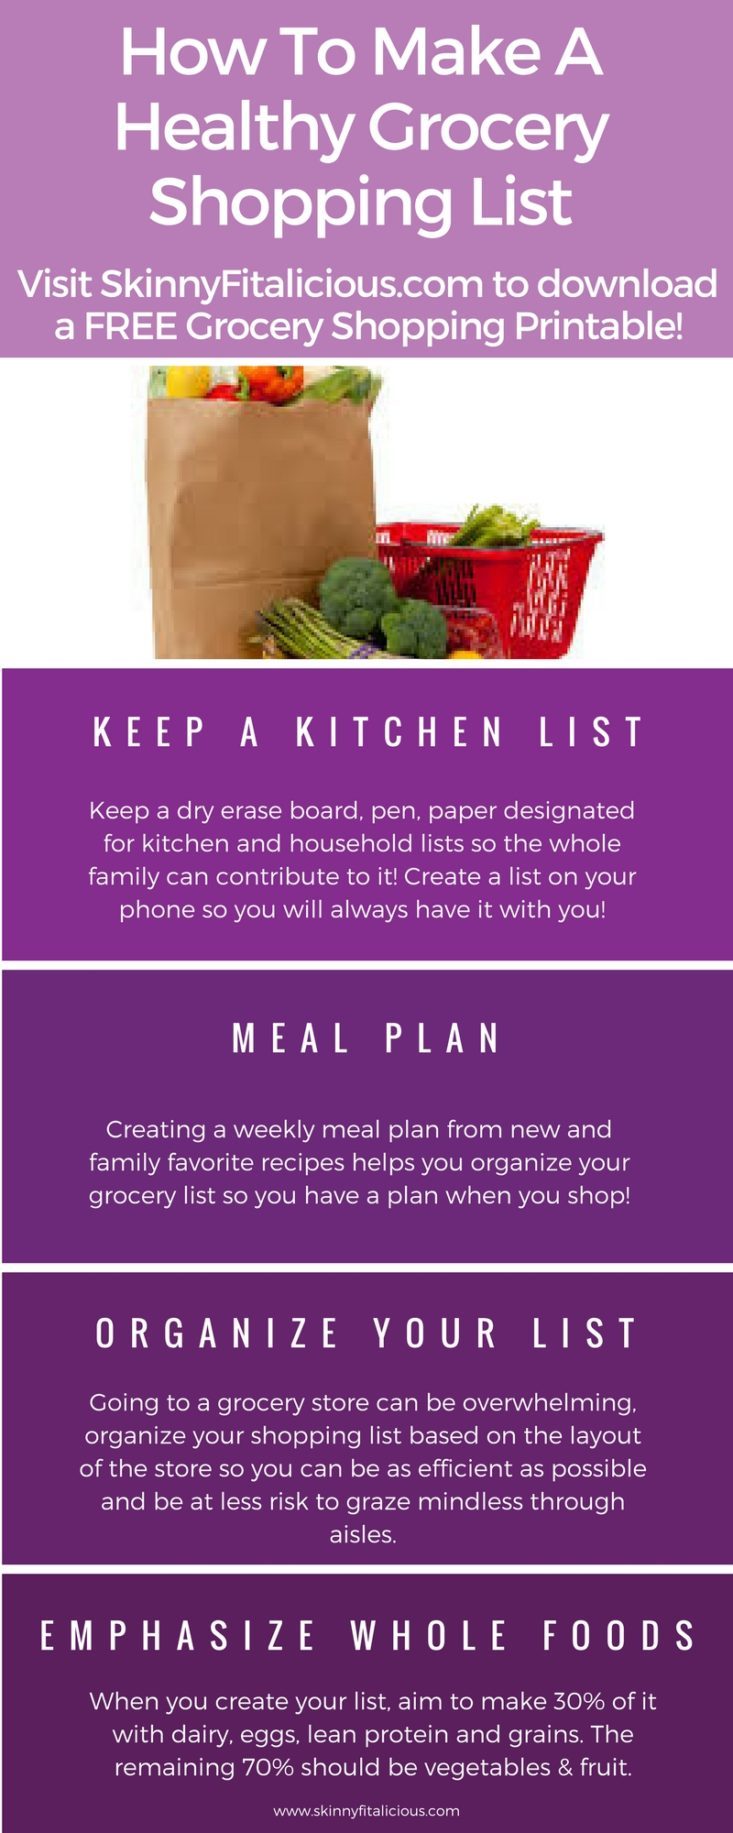 There is no right or wrong way to making a healthy grocery shopping list, but there are definitely a few ways you can stay organized.